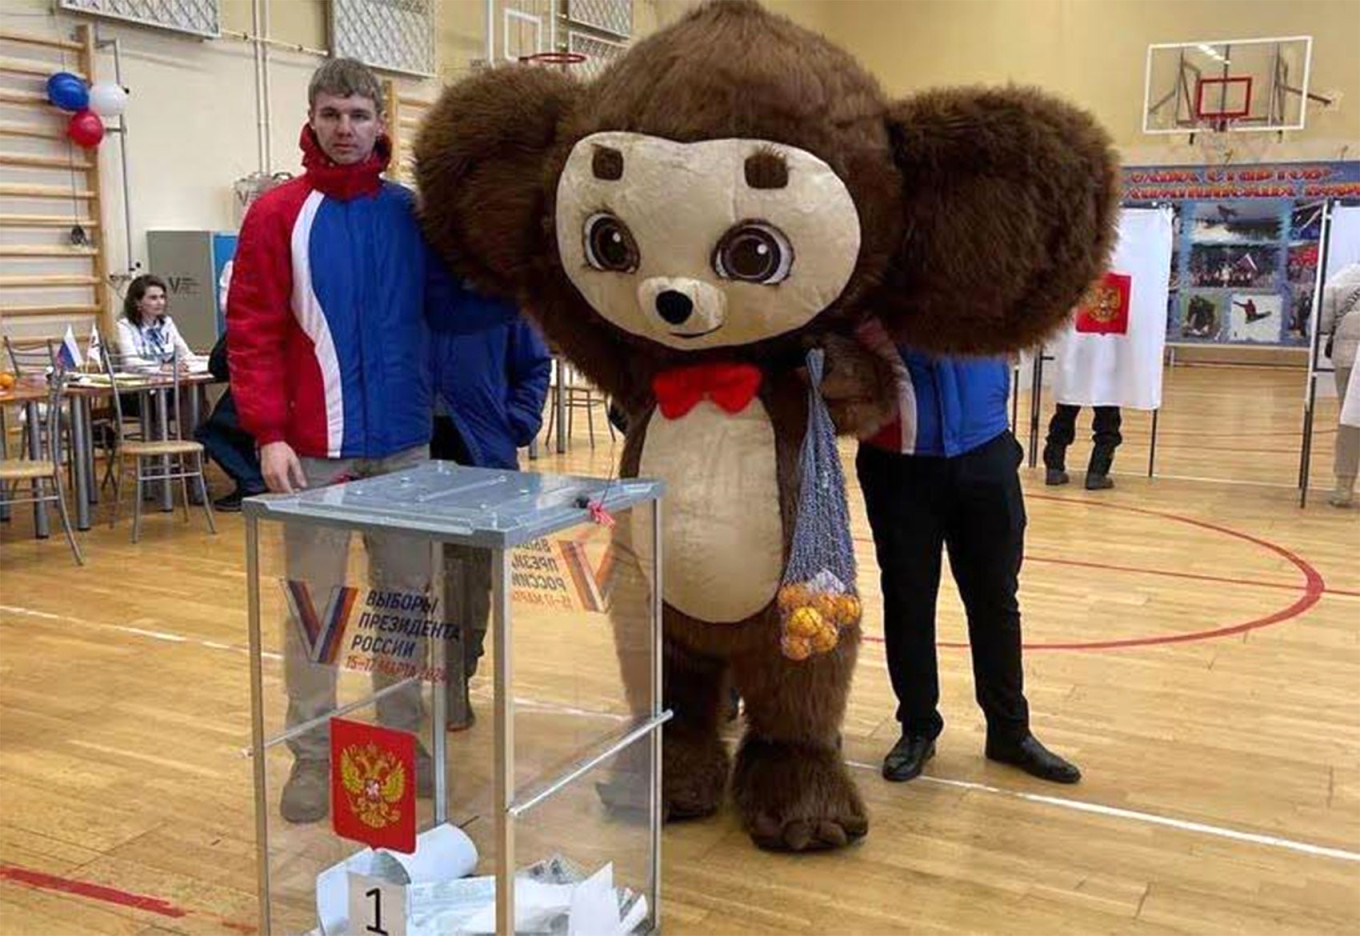 
					A local resident came to a polling station in Yugorsk dressed as Cheburashka. He voted in the Russian presidential election and treated Yugorsk residents to oranges.					 					t.me/vybora				